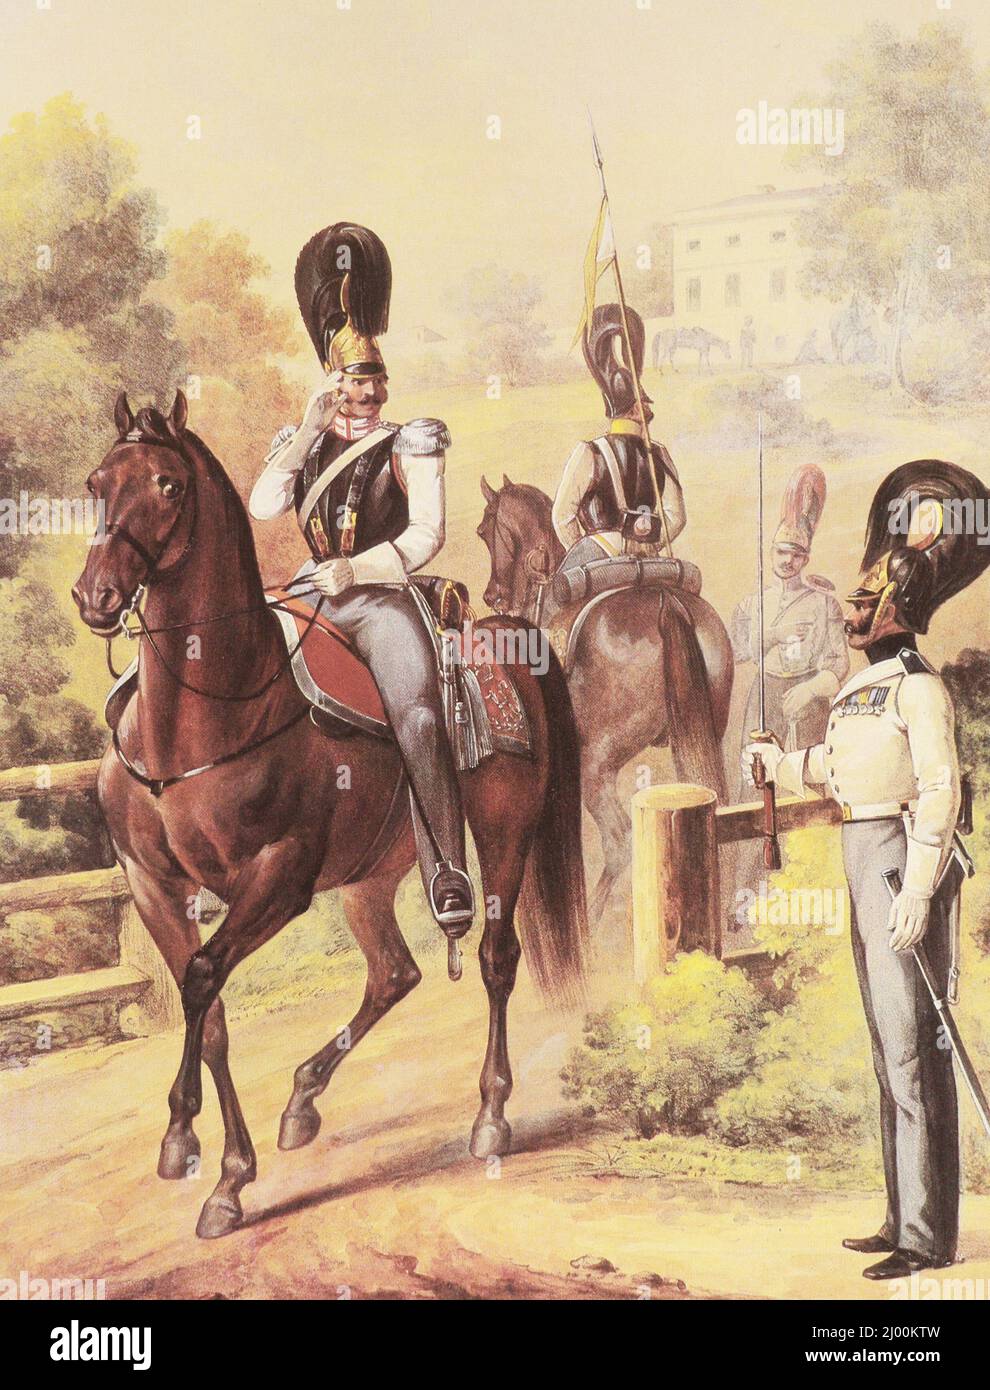 Staff officer, privates and trumpeter of the 1st Cuirassier Division of the Russian Army. Painting from 1840. Stock Photo